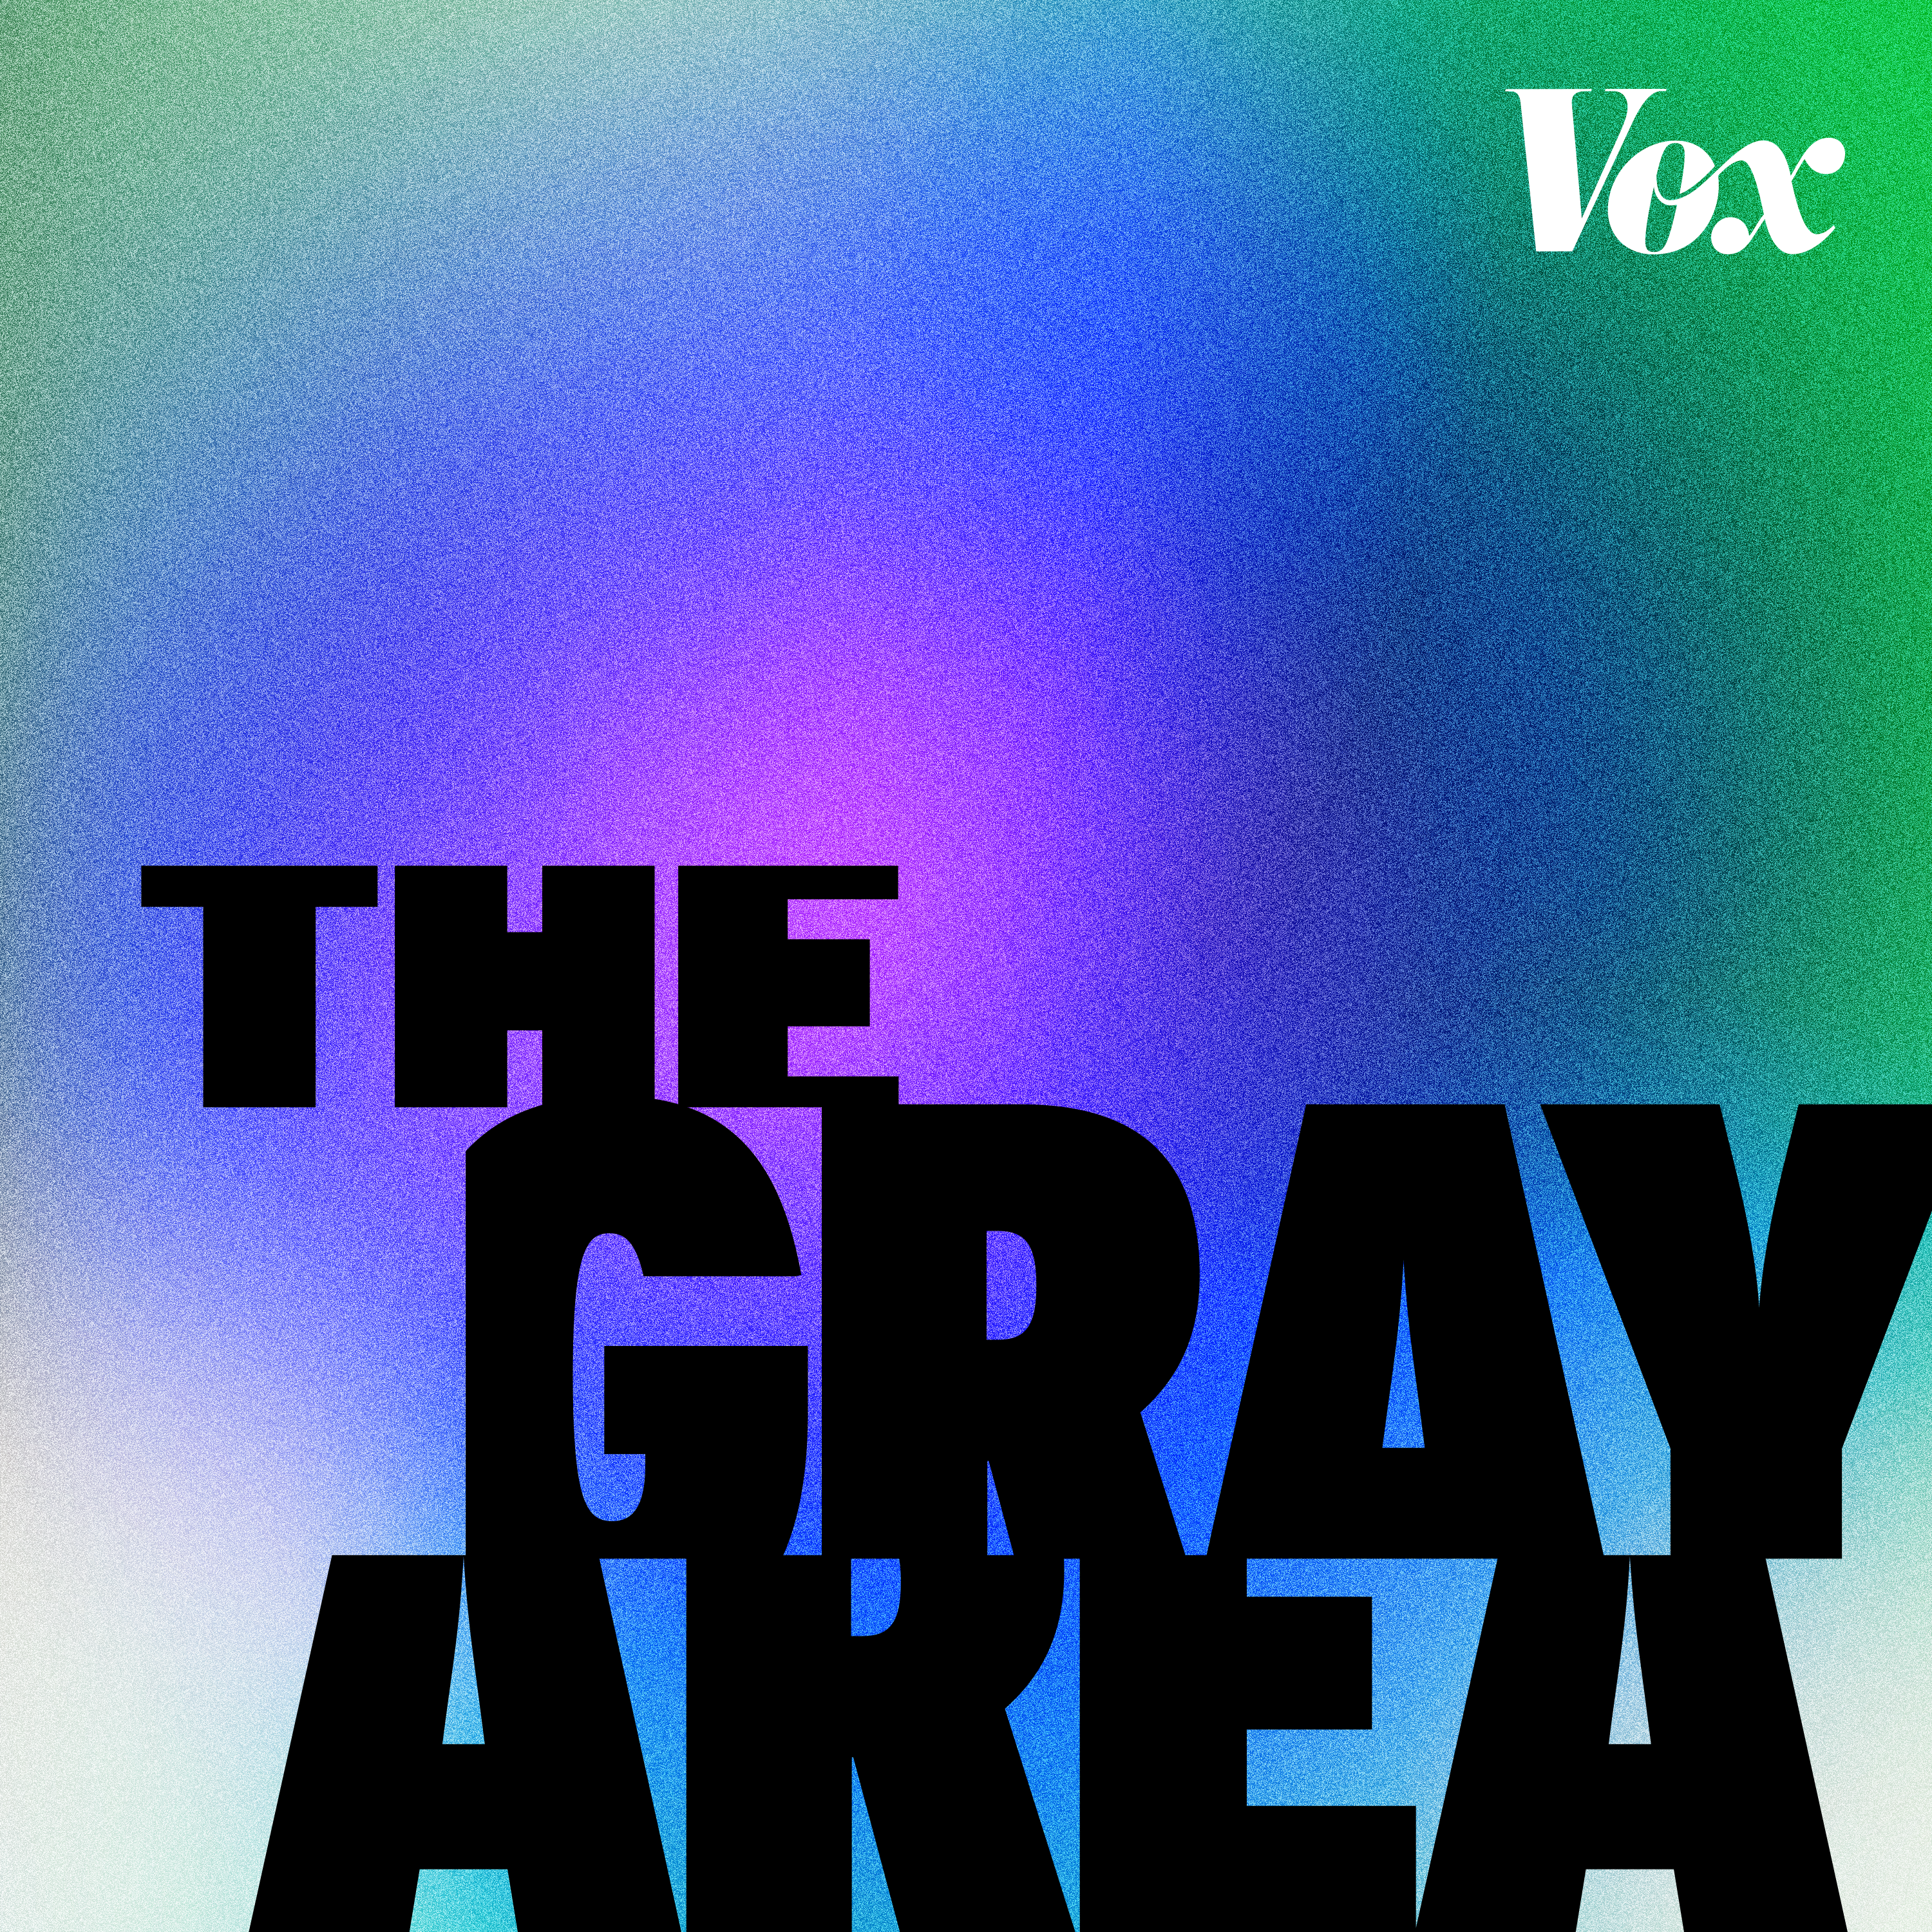 The Gray Area